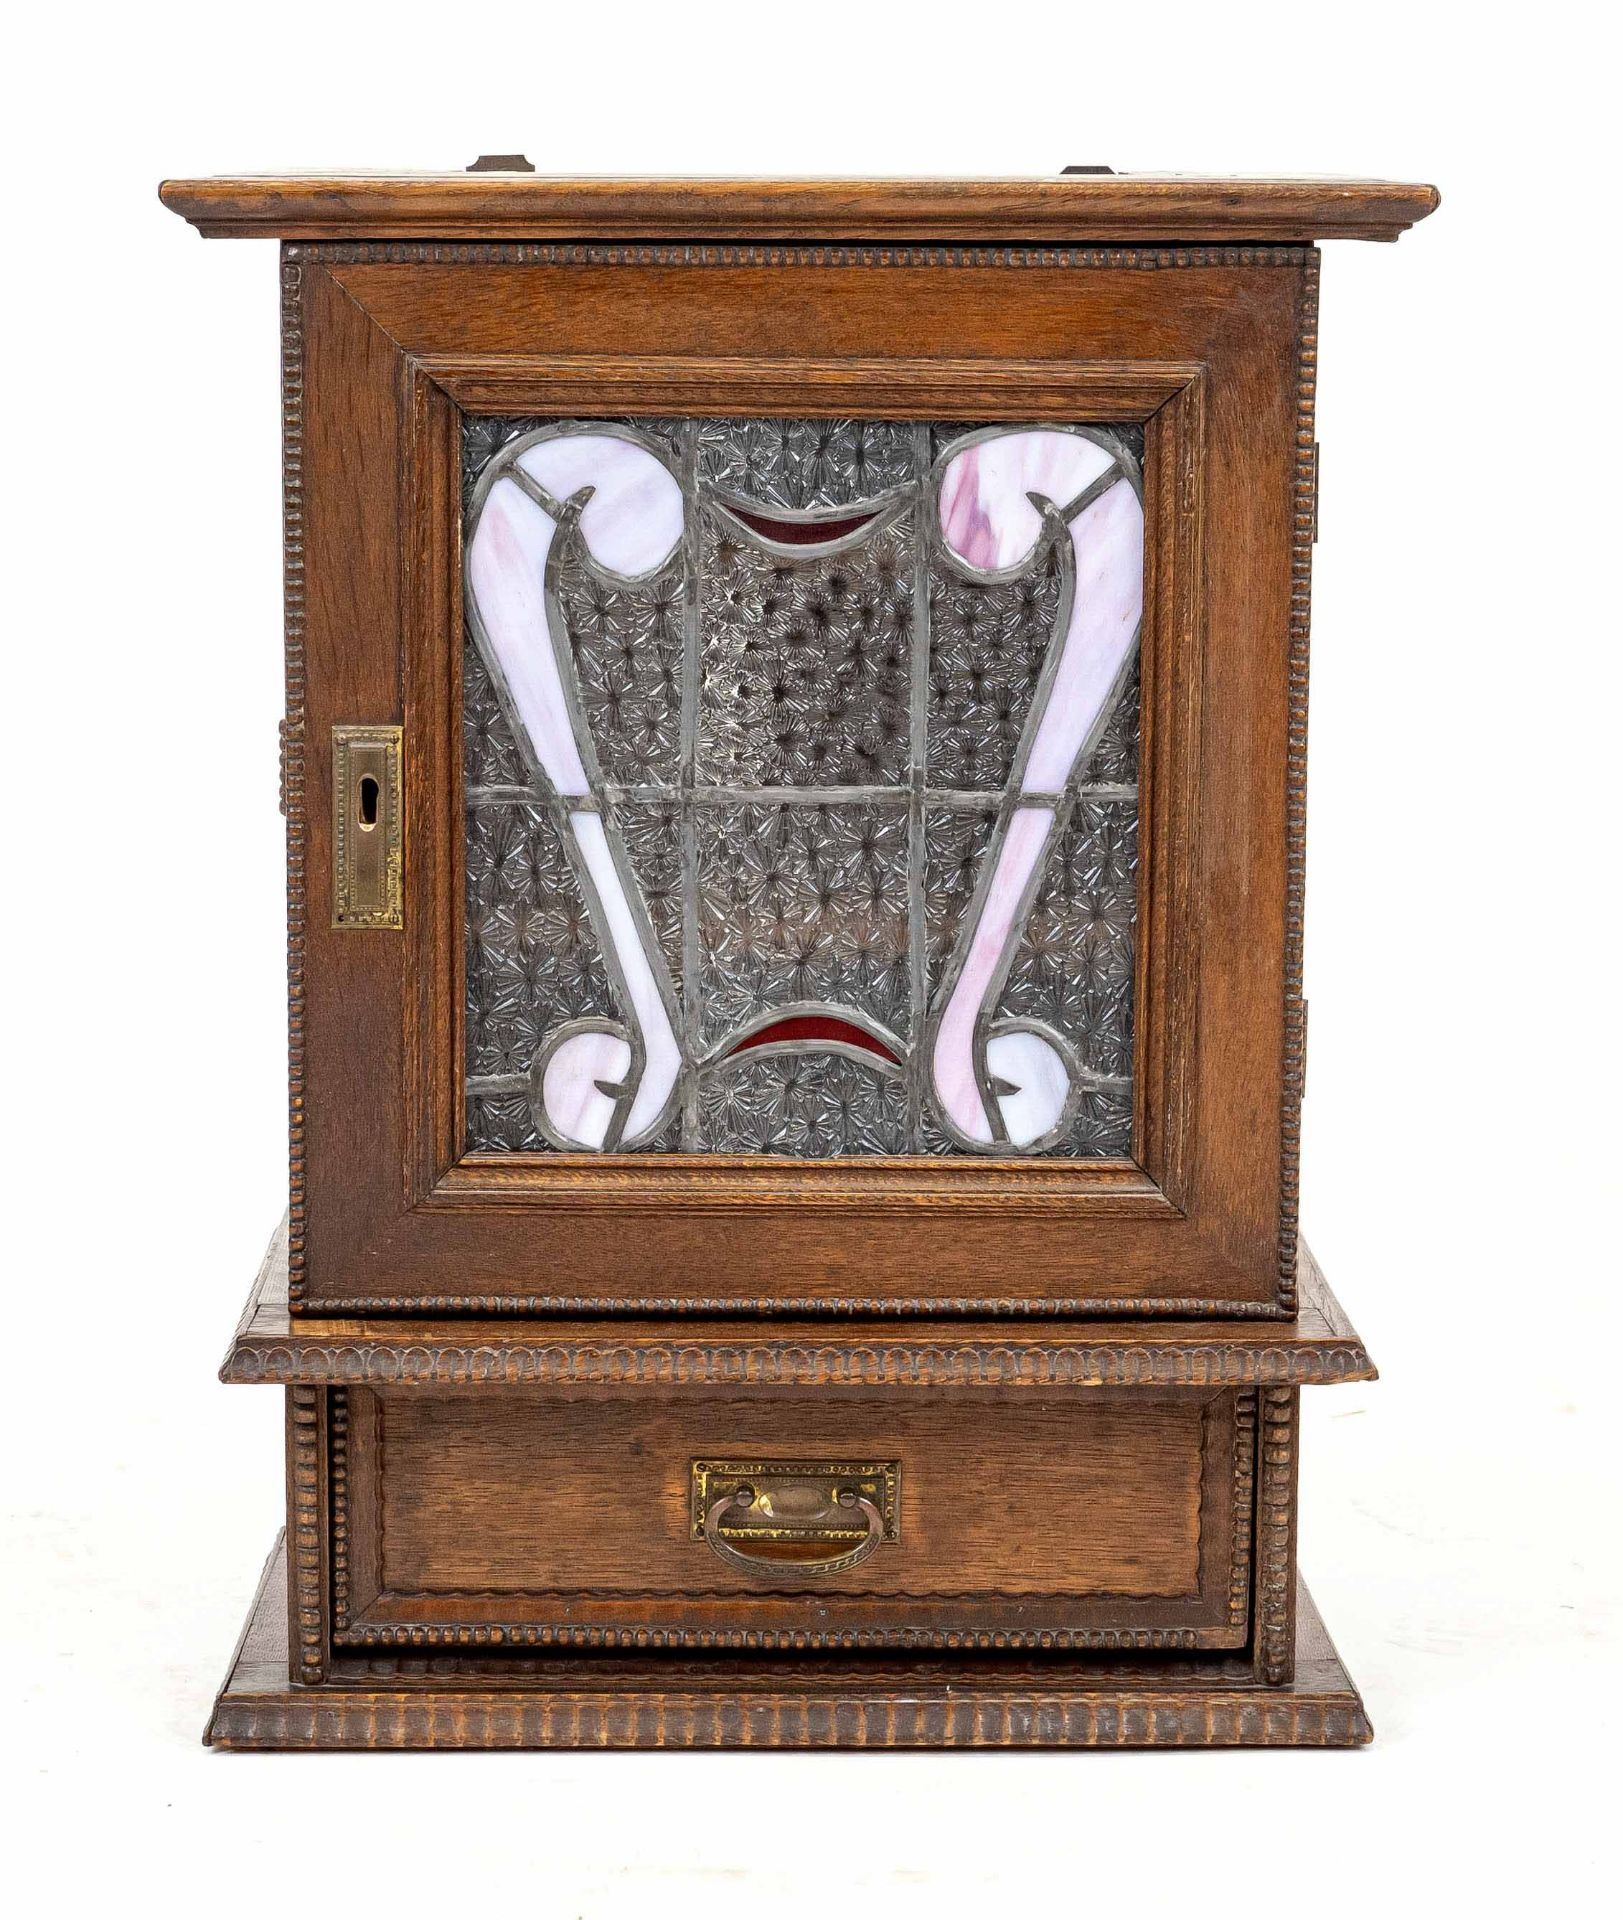 Art Nouveau hanging cabinet circa 1890, oak, body with drawer and leaded glass door, 59 x 46 x 25